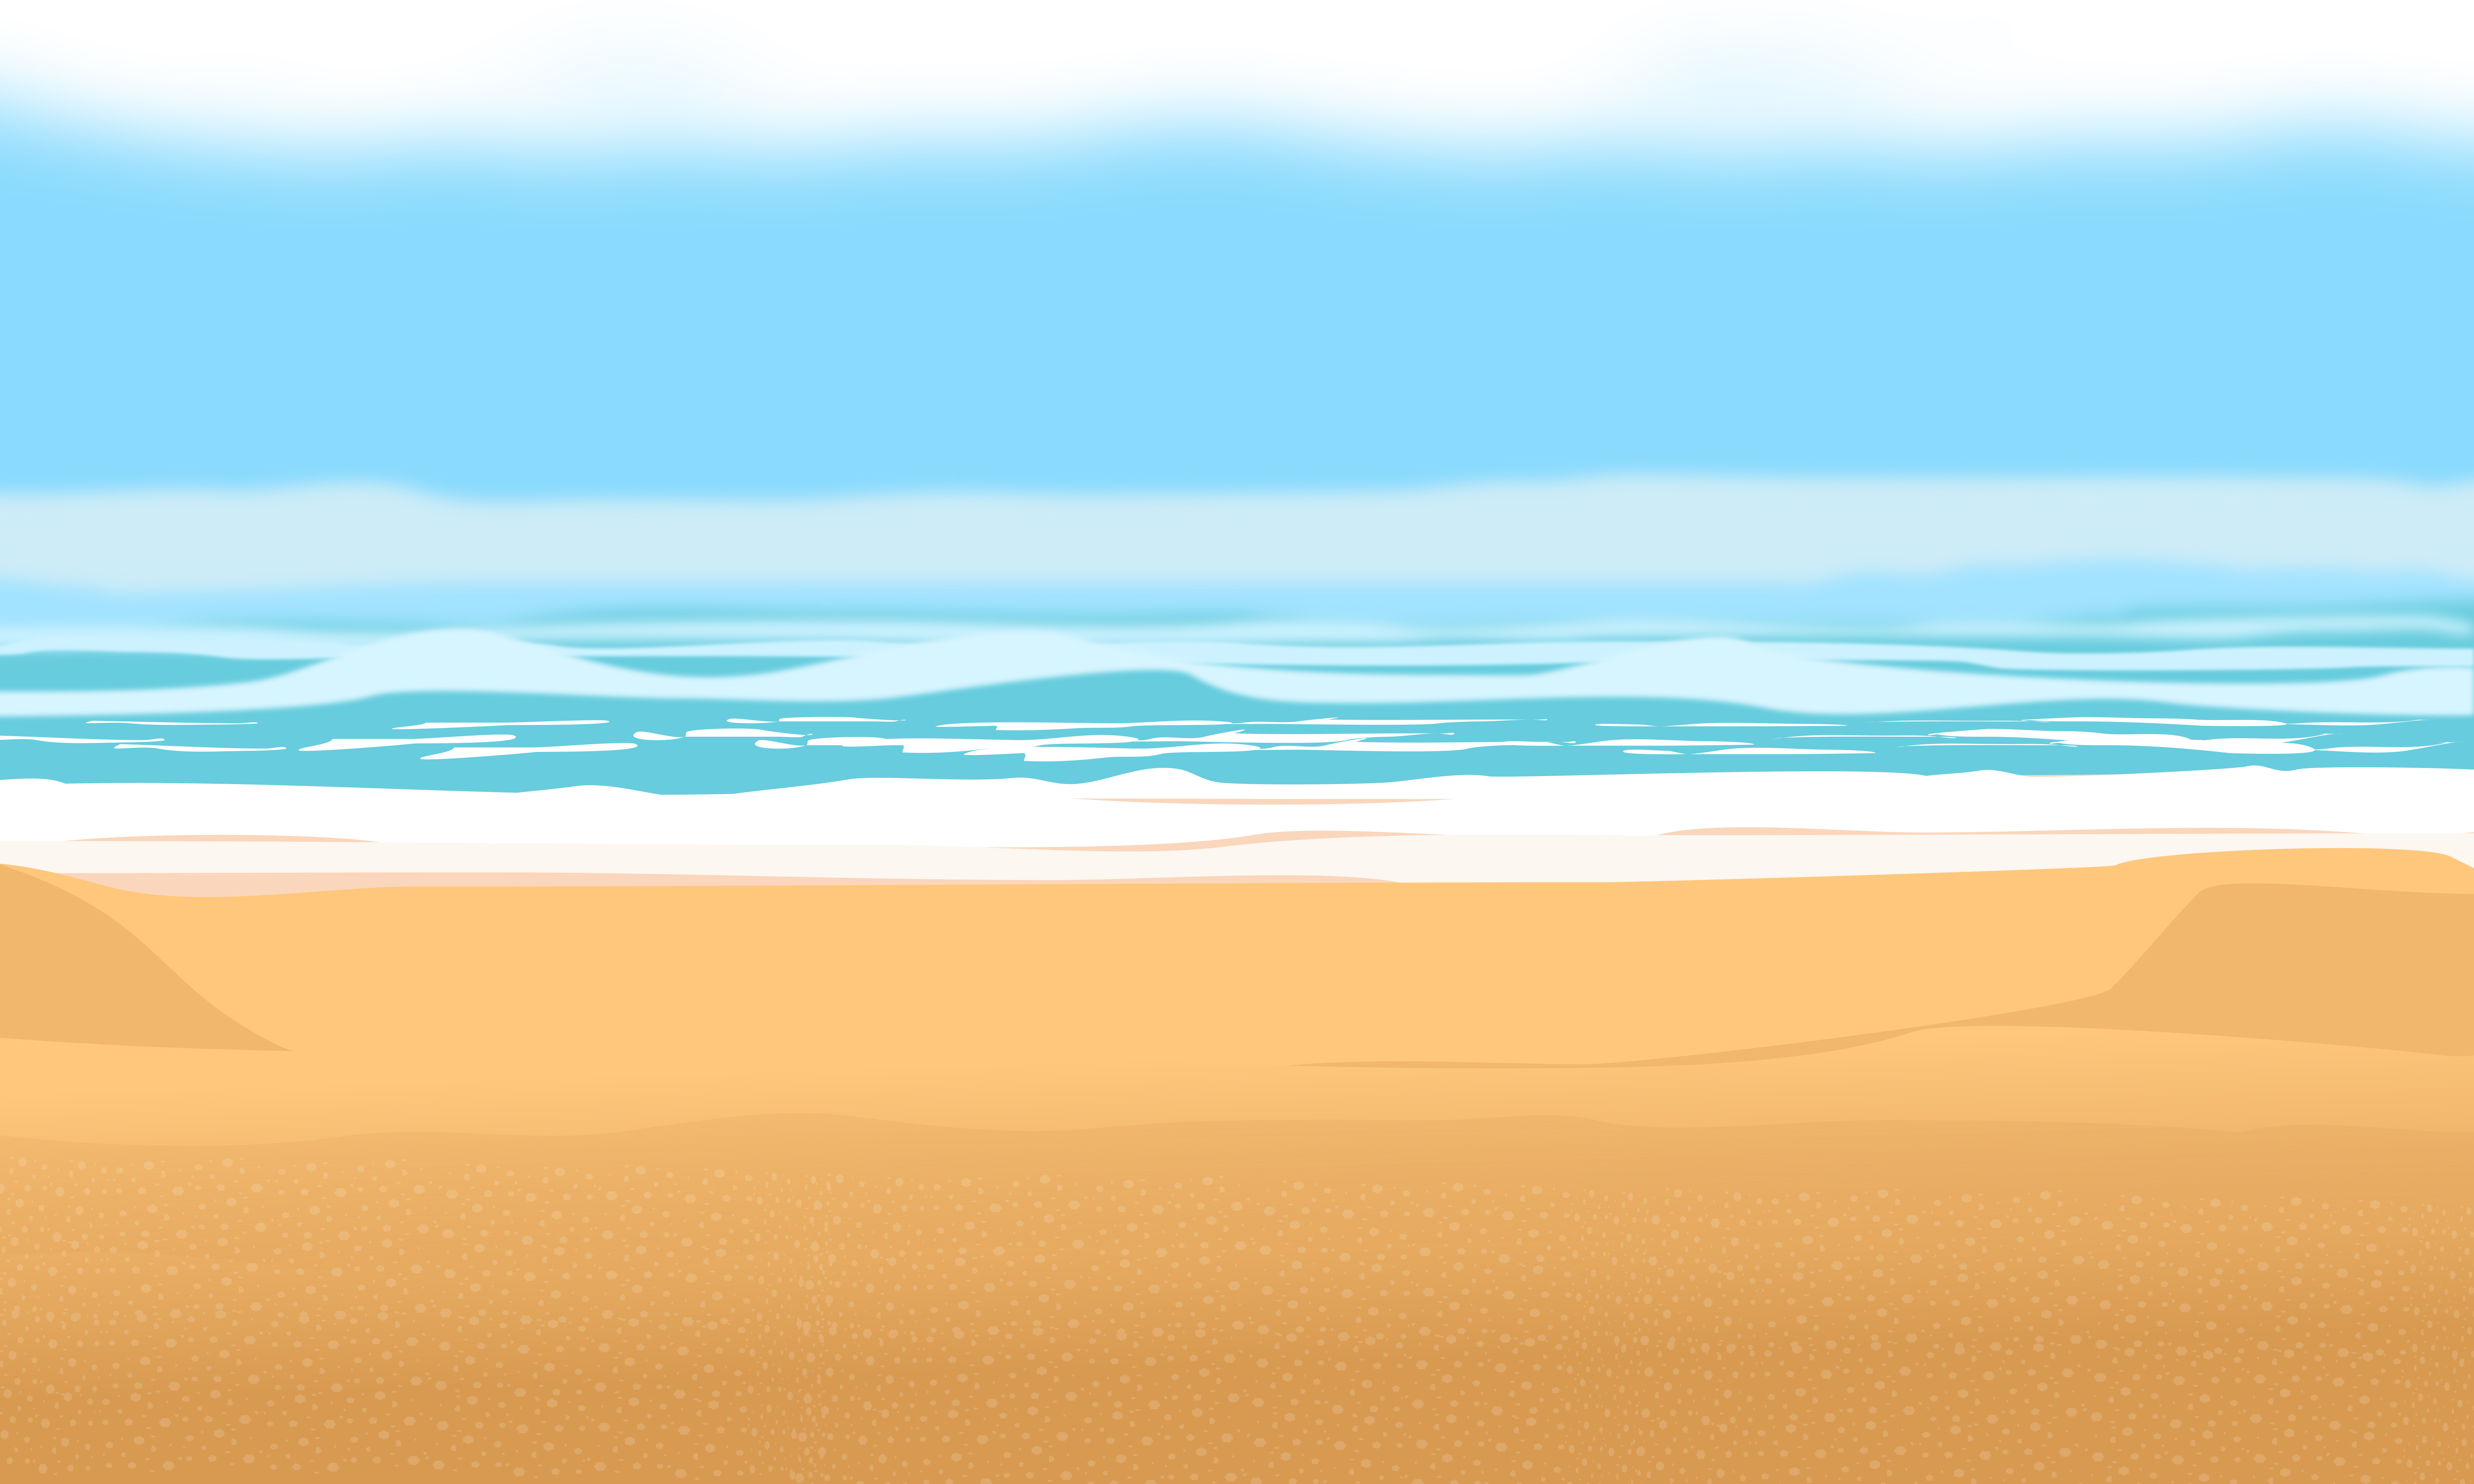 Background for summer beach and vacation. vector design illustration